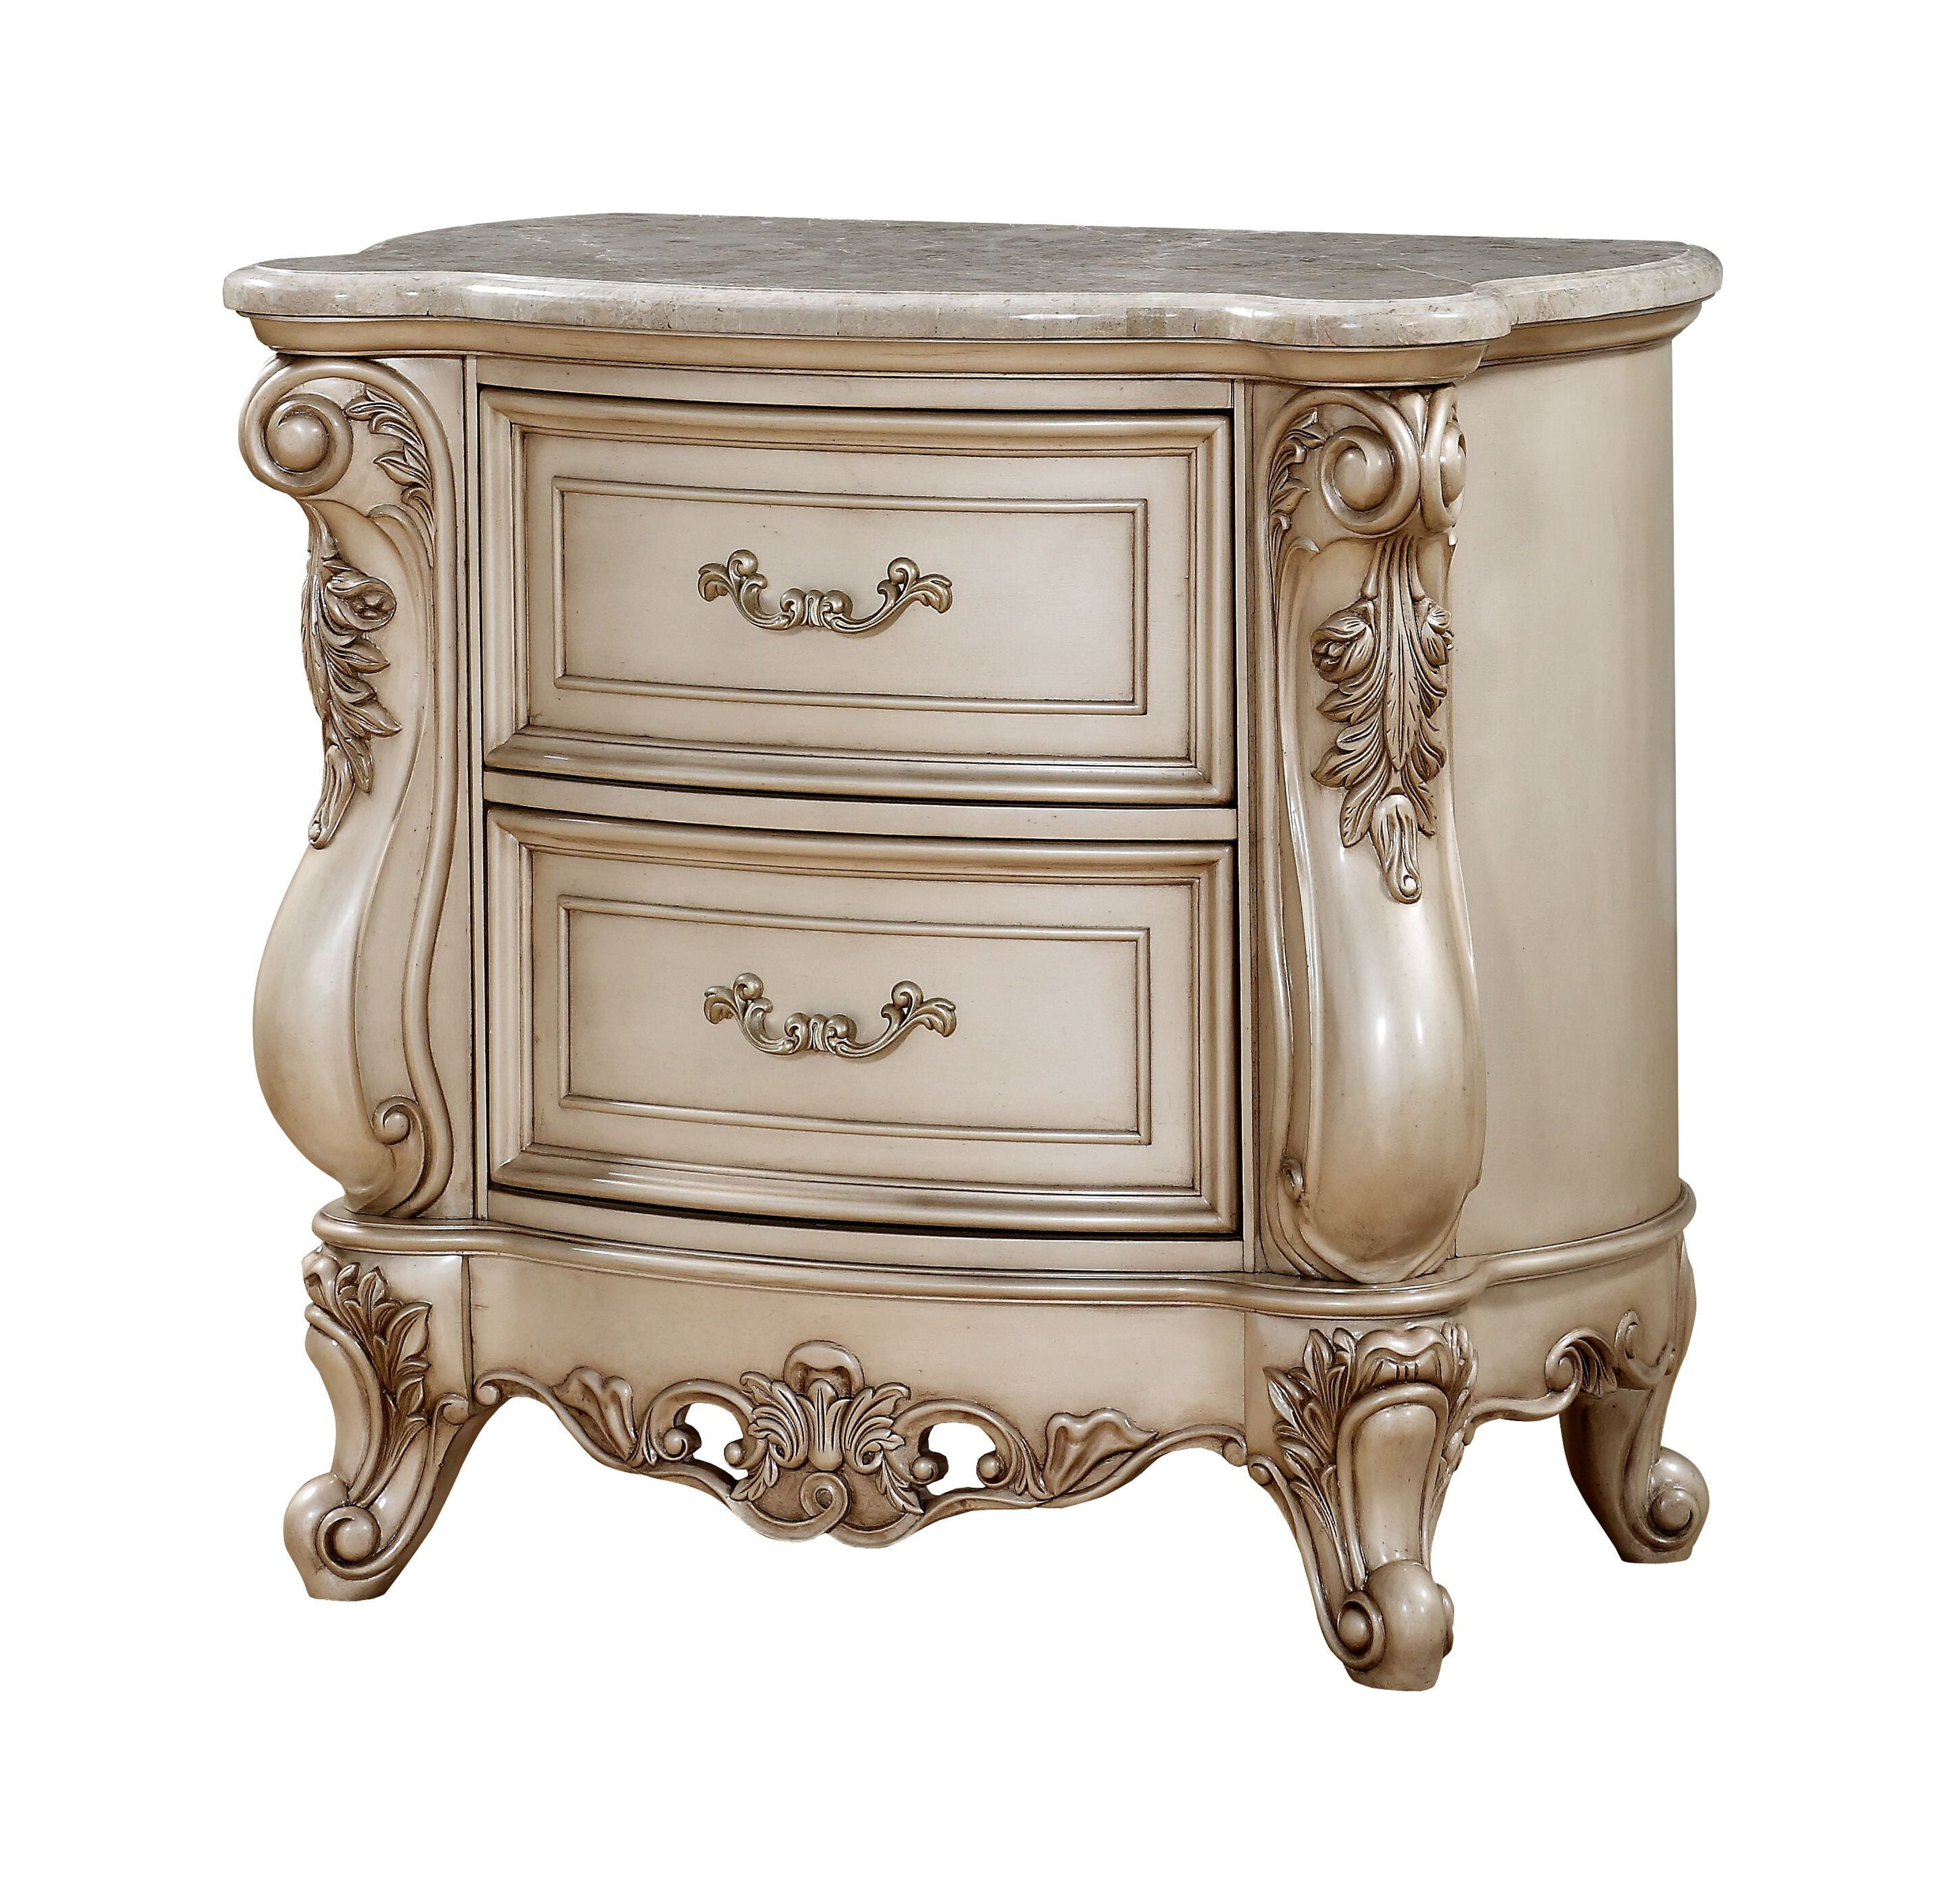 Picture of ACME 27443 Gorsedd Nightstand with Marble Top - Marble & Antique White - 32 x 34 x 20 in.